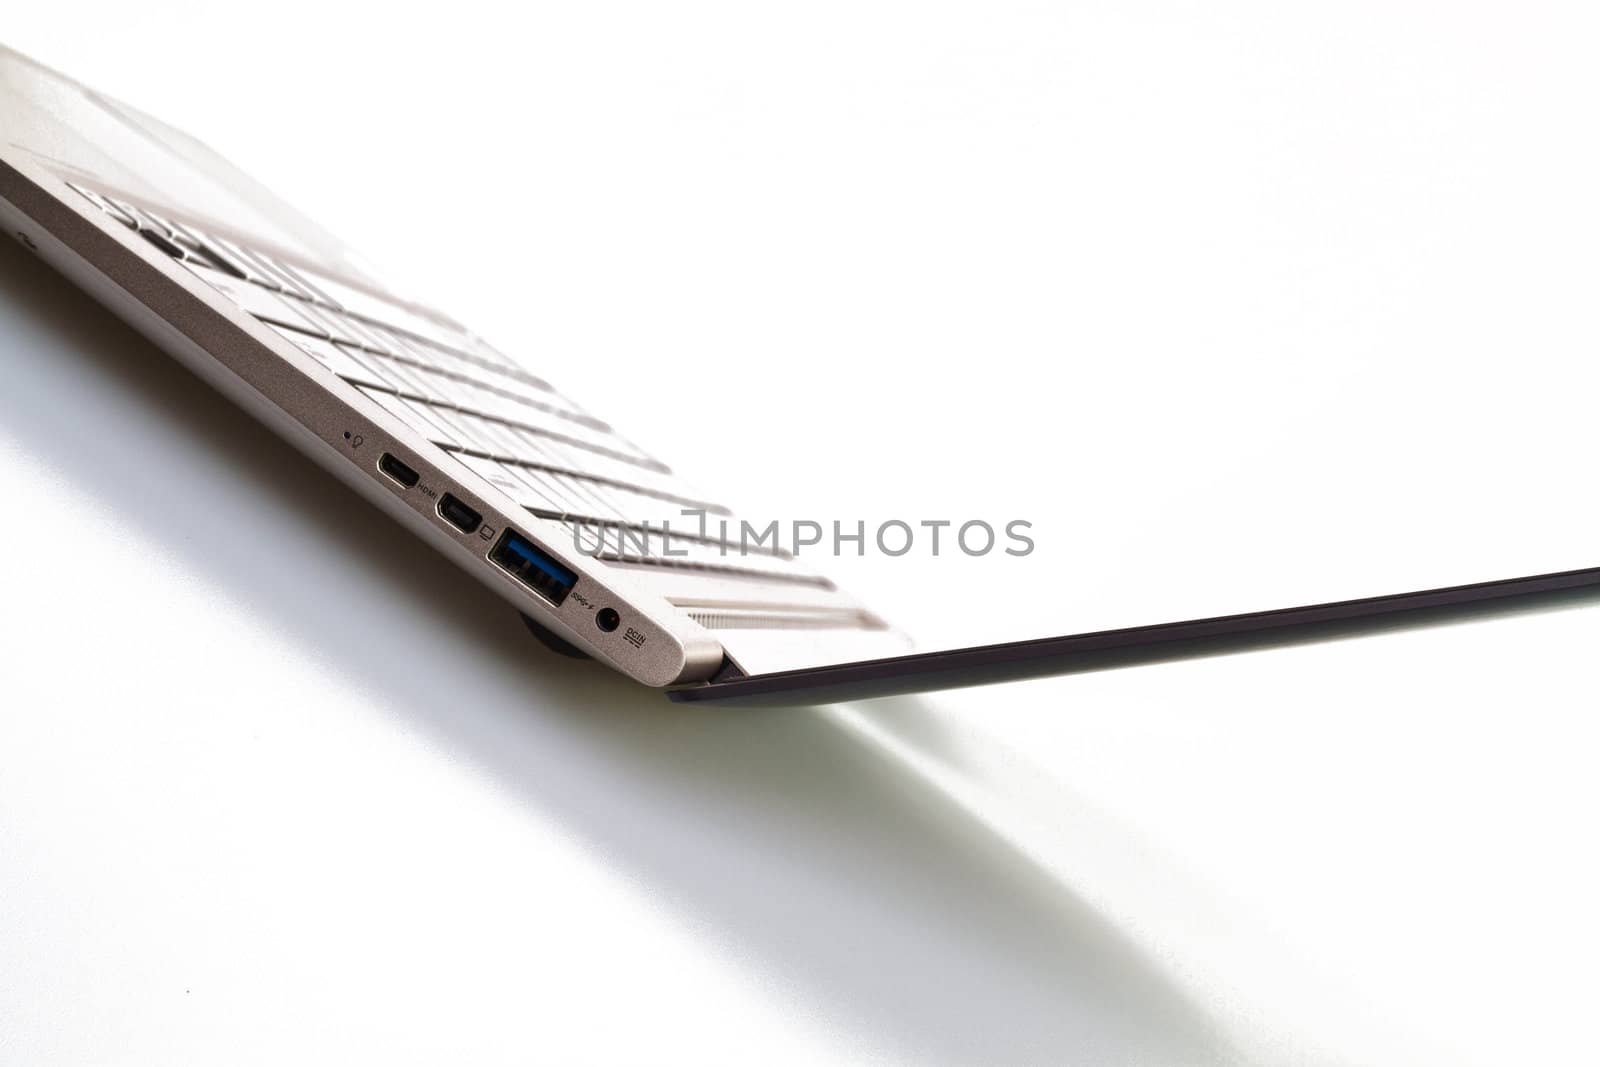 Angled view of an ultrathin modern laptop against white for abstract and background